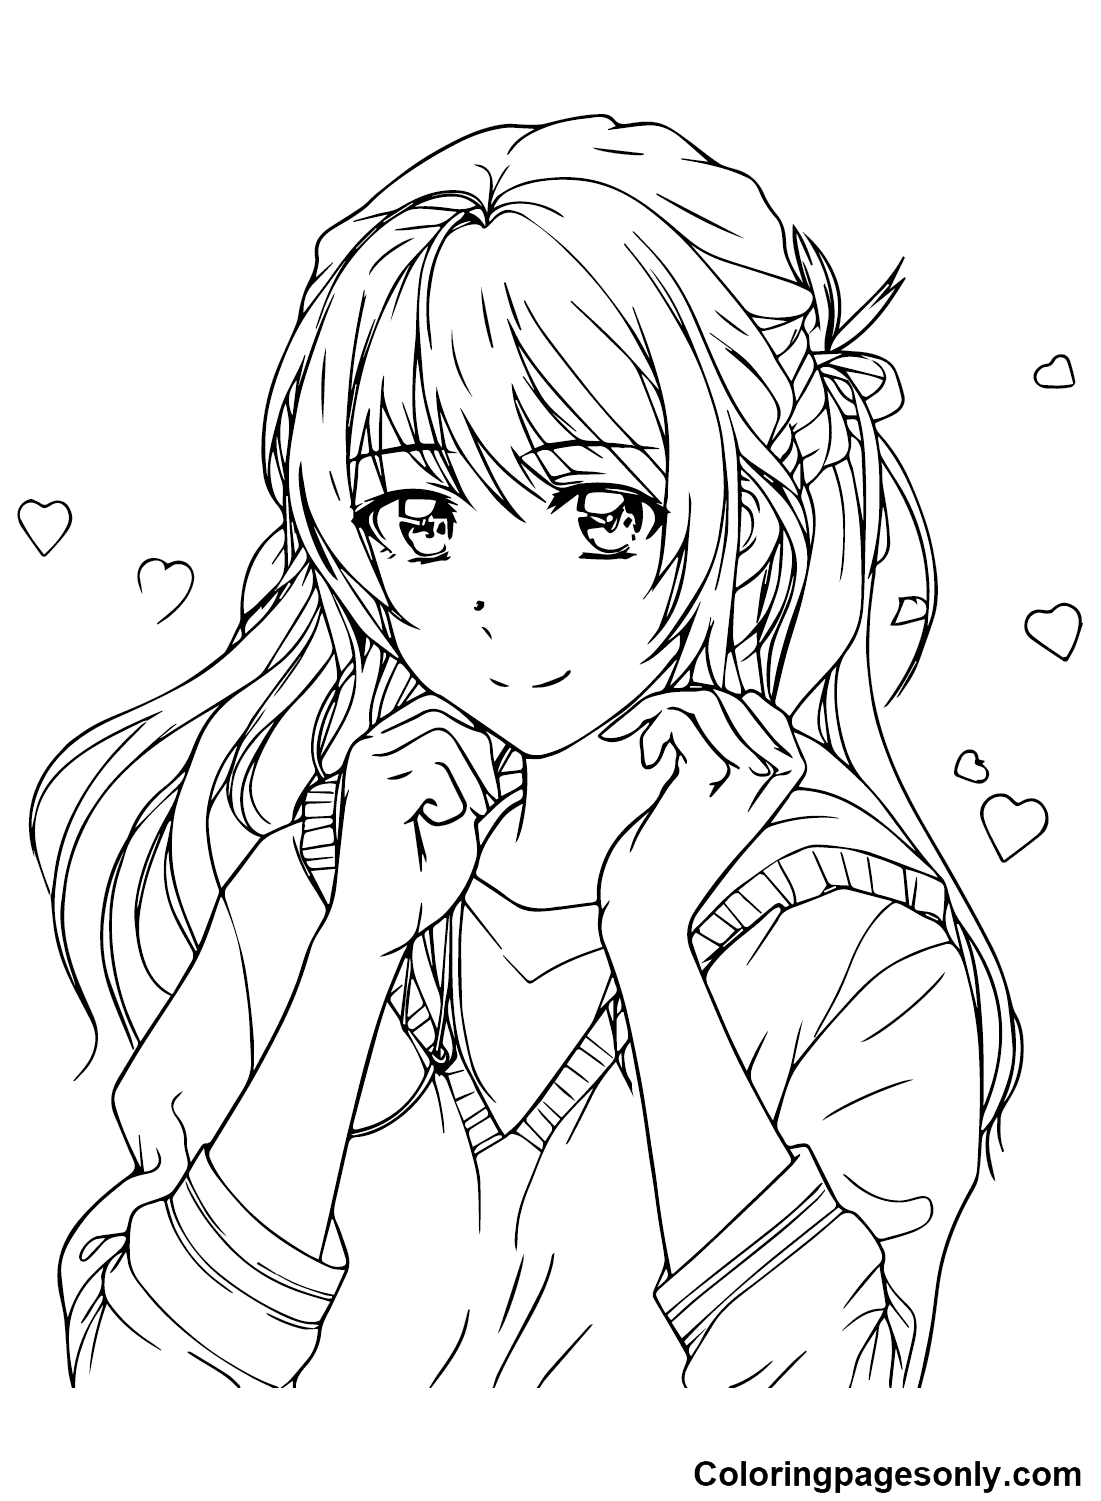 Hot Anime Girl Coloring Pages - Anime Girl Coloring Pages - Coloring ...